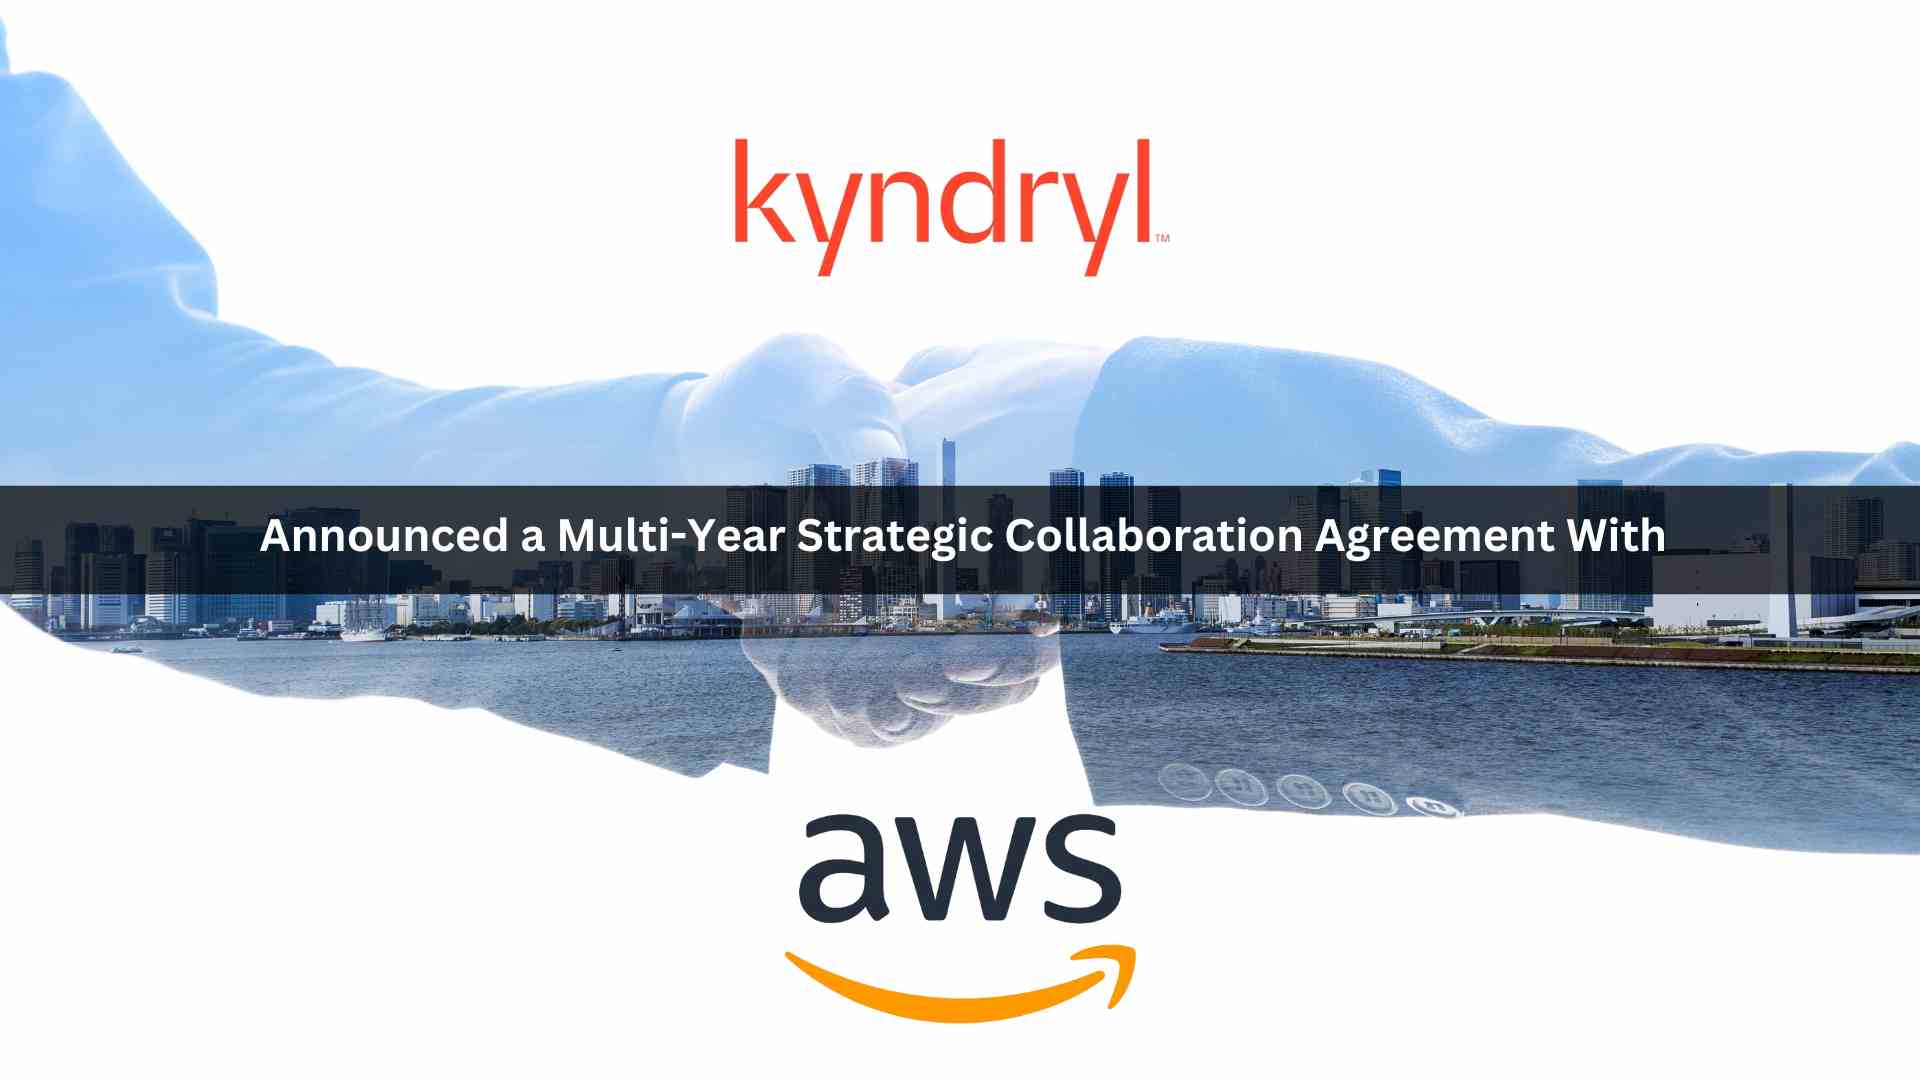 Kyndryl Signs Multi-Year Strategic Collaboration Agreement with AWS to Accelerate Customer Adoption of Generative AI Solutions